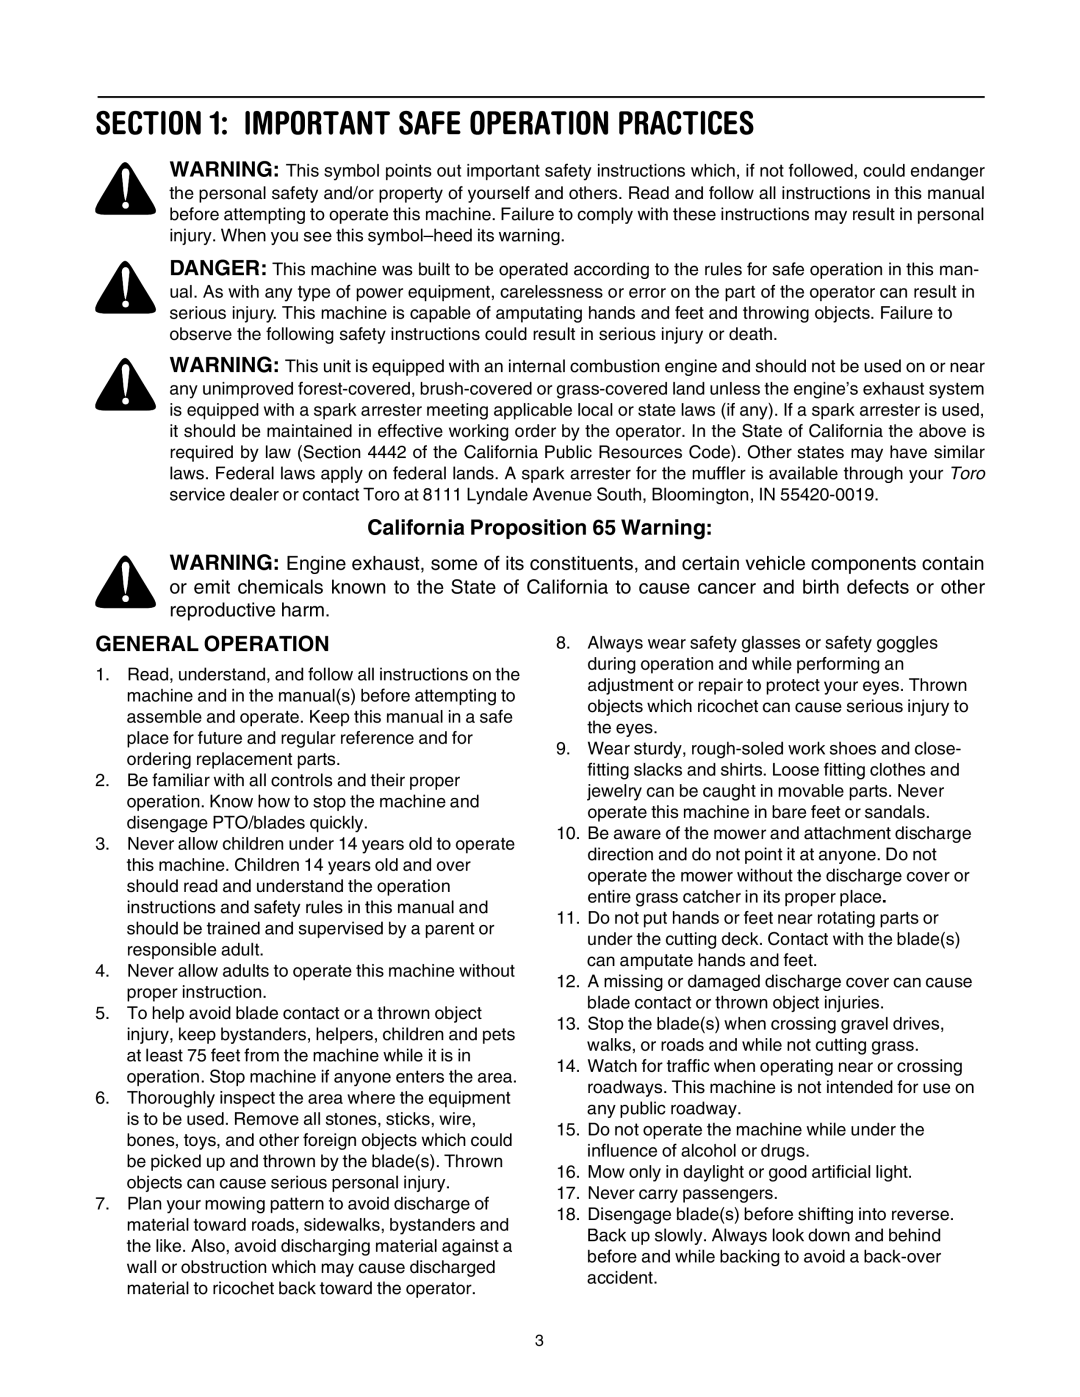 Toro 71430, 71432 manual Important Safe Operation Practices, California Proposition 65 Warning, General Operation 